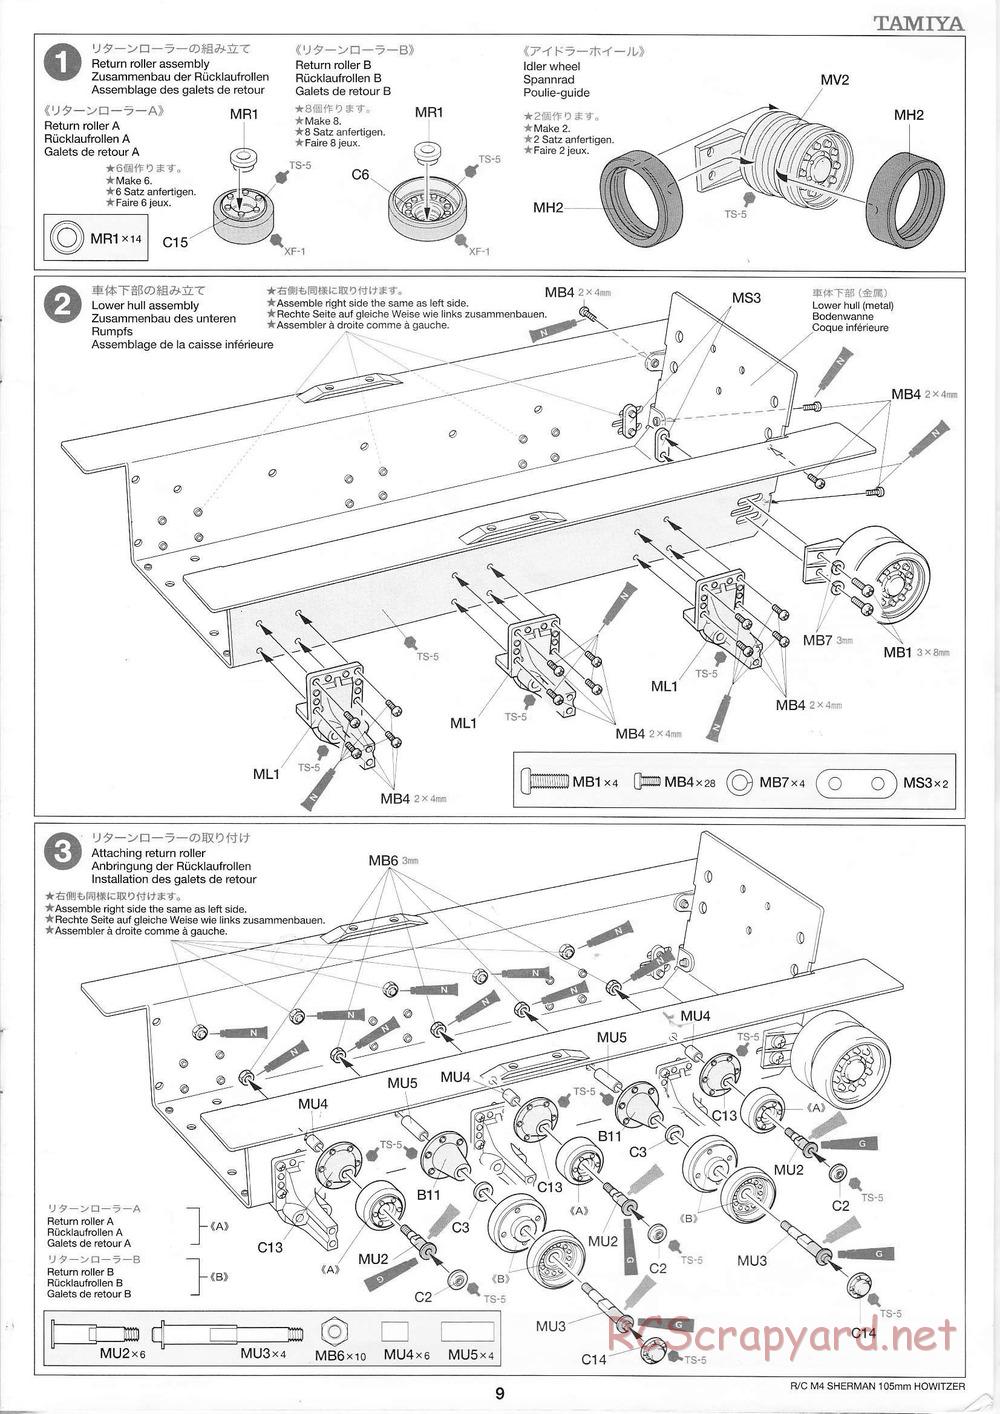 Tamiya - M4 Sherman 105mm Howitzer - 1/16 Scale Chassis - Manual - Page 9